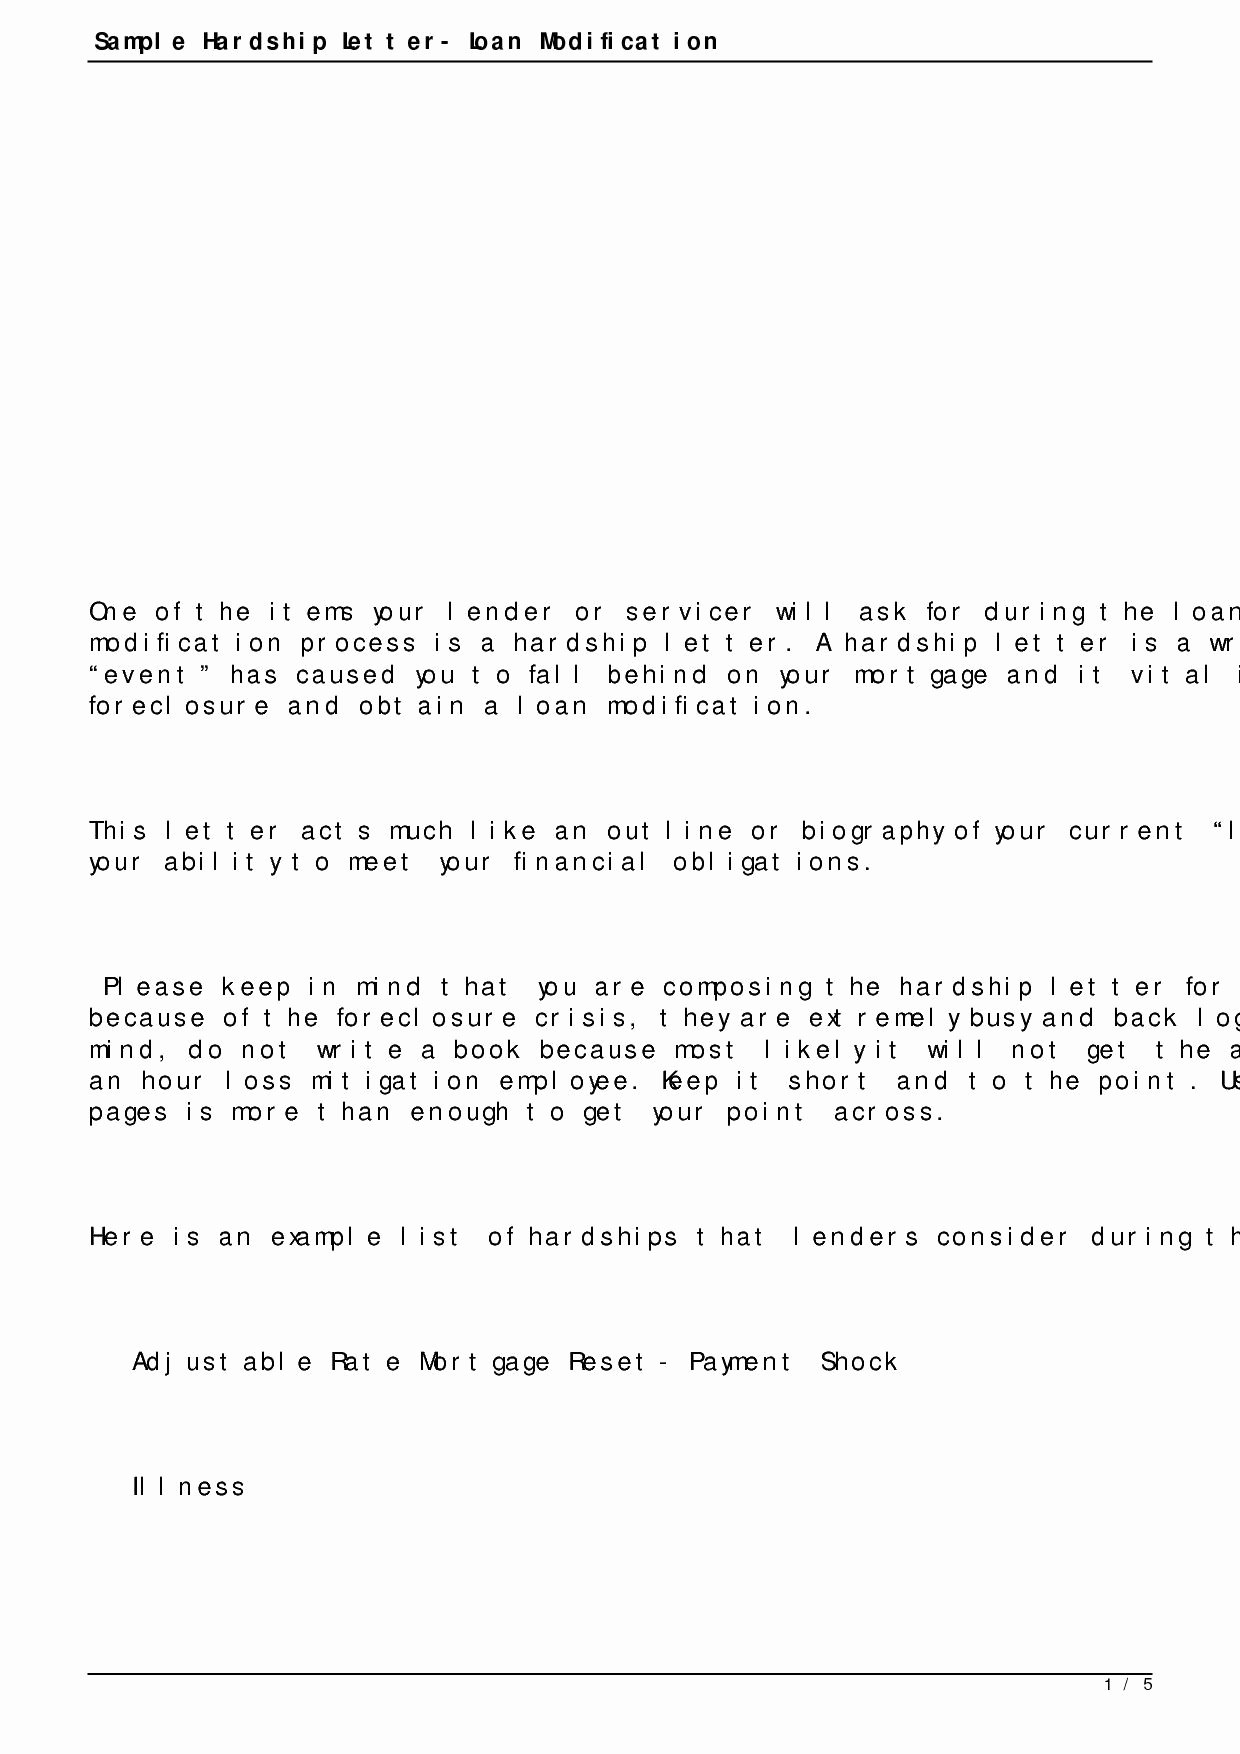 Payment Shock Letter Example Luxury Mortgage Payment Shock Letter Template Collection